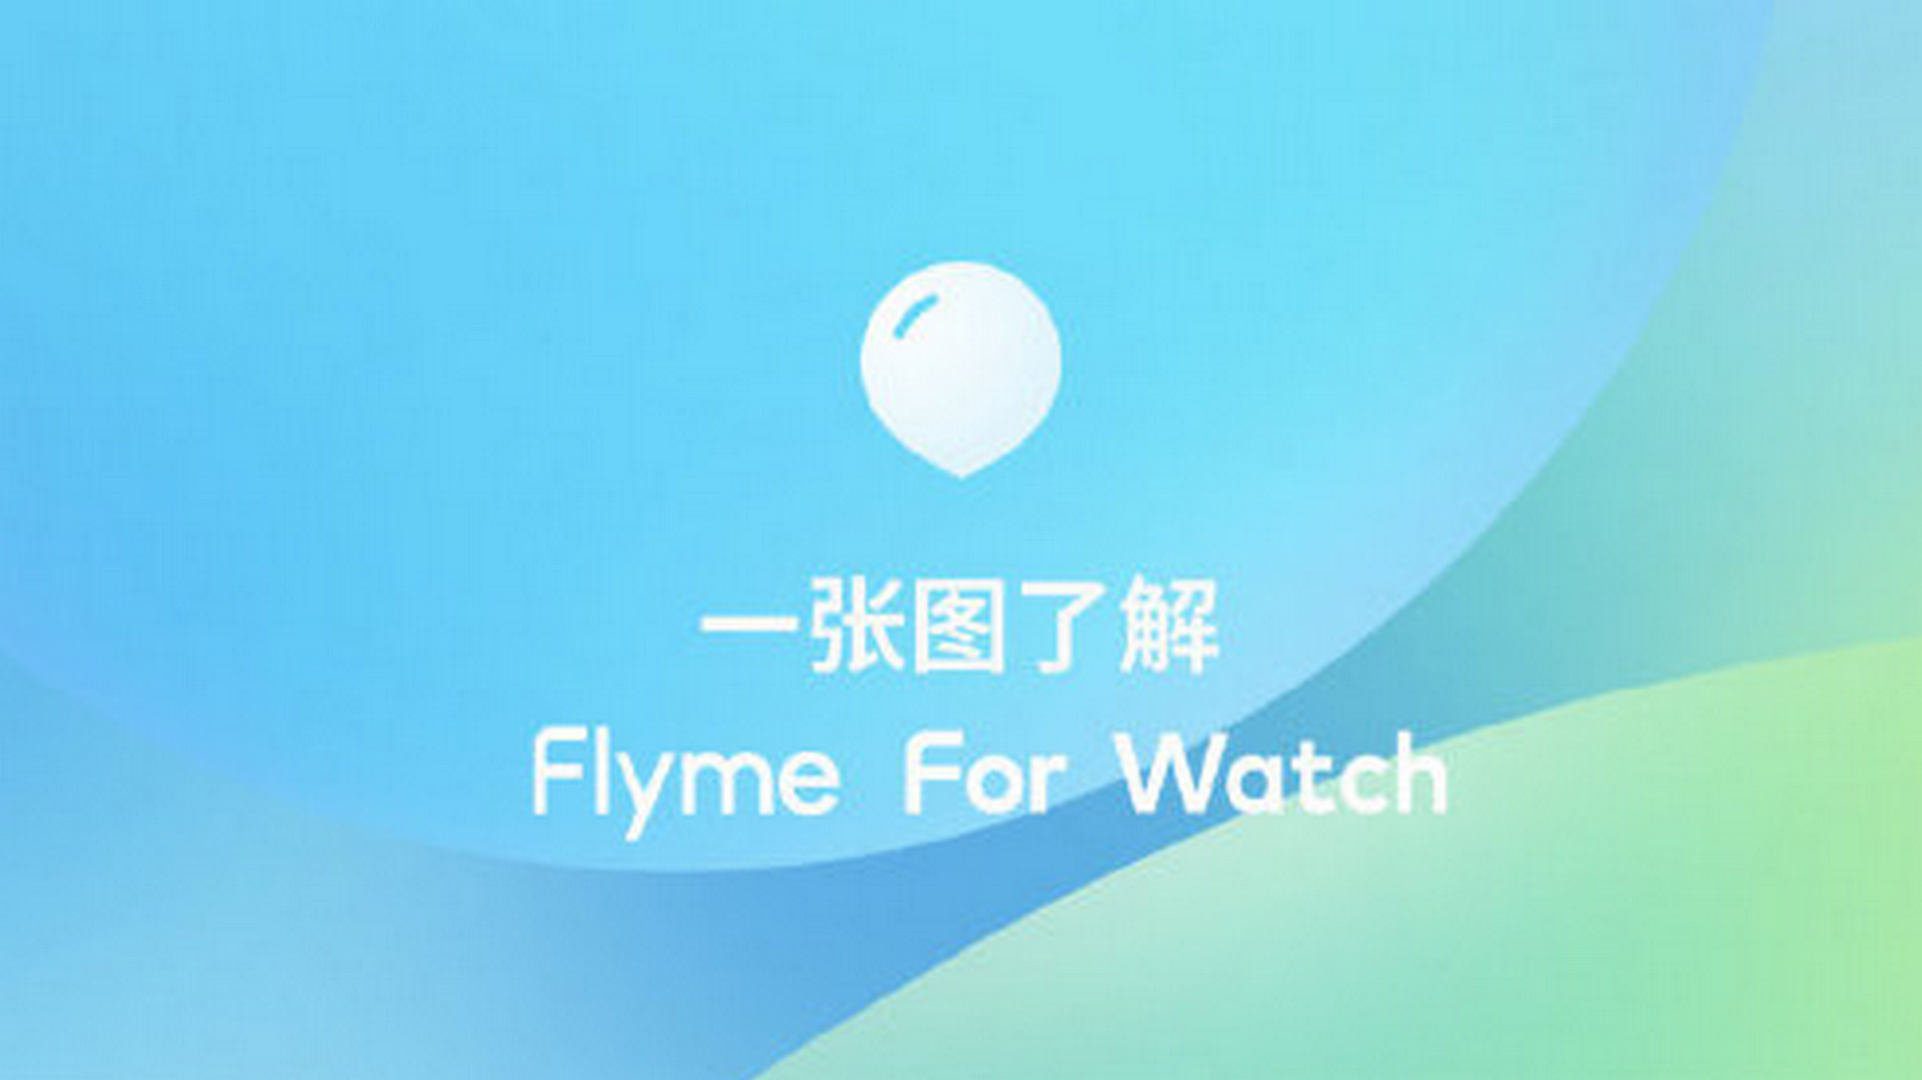 Flyme for Watch